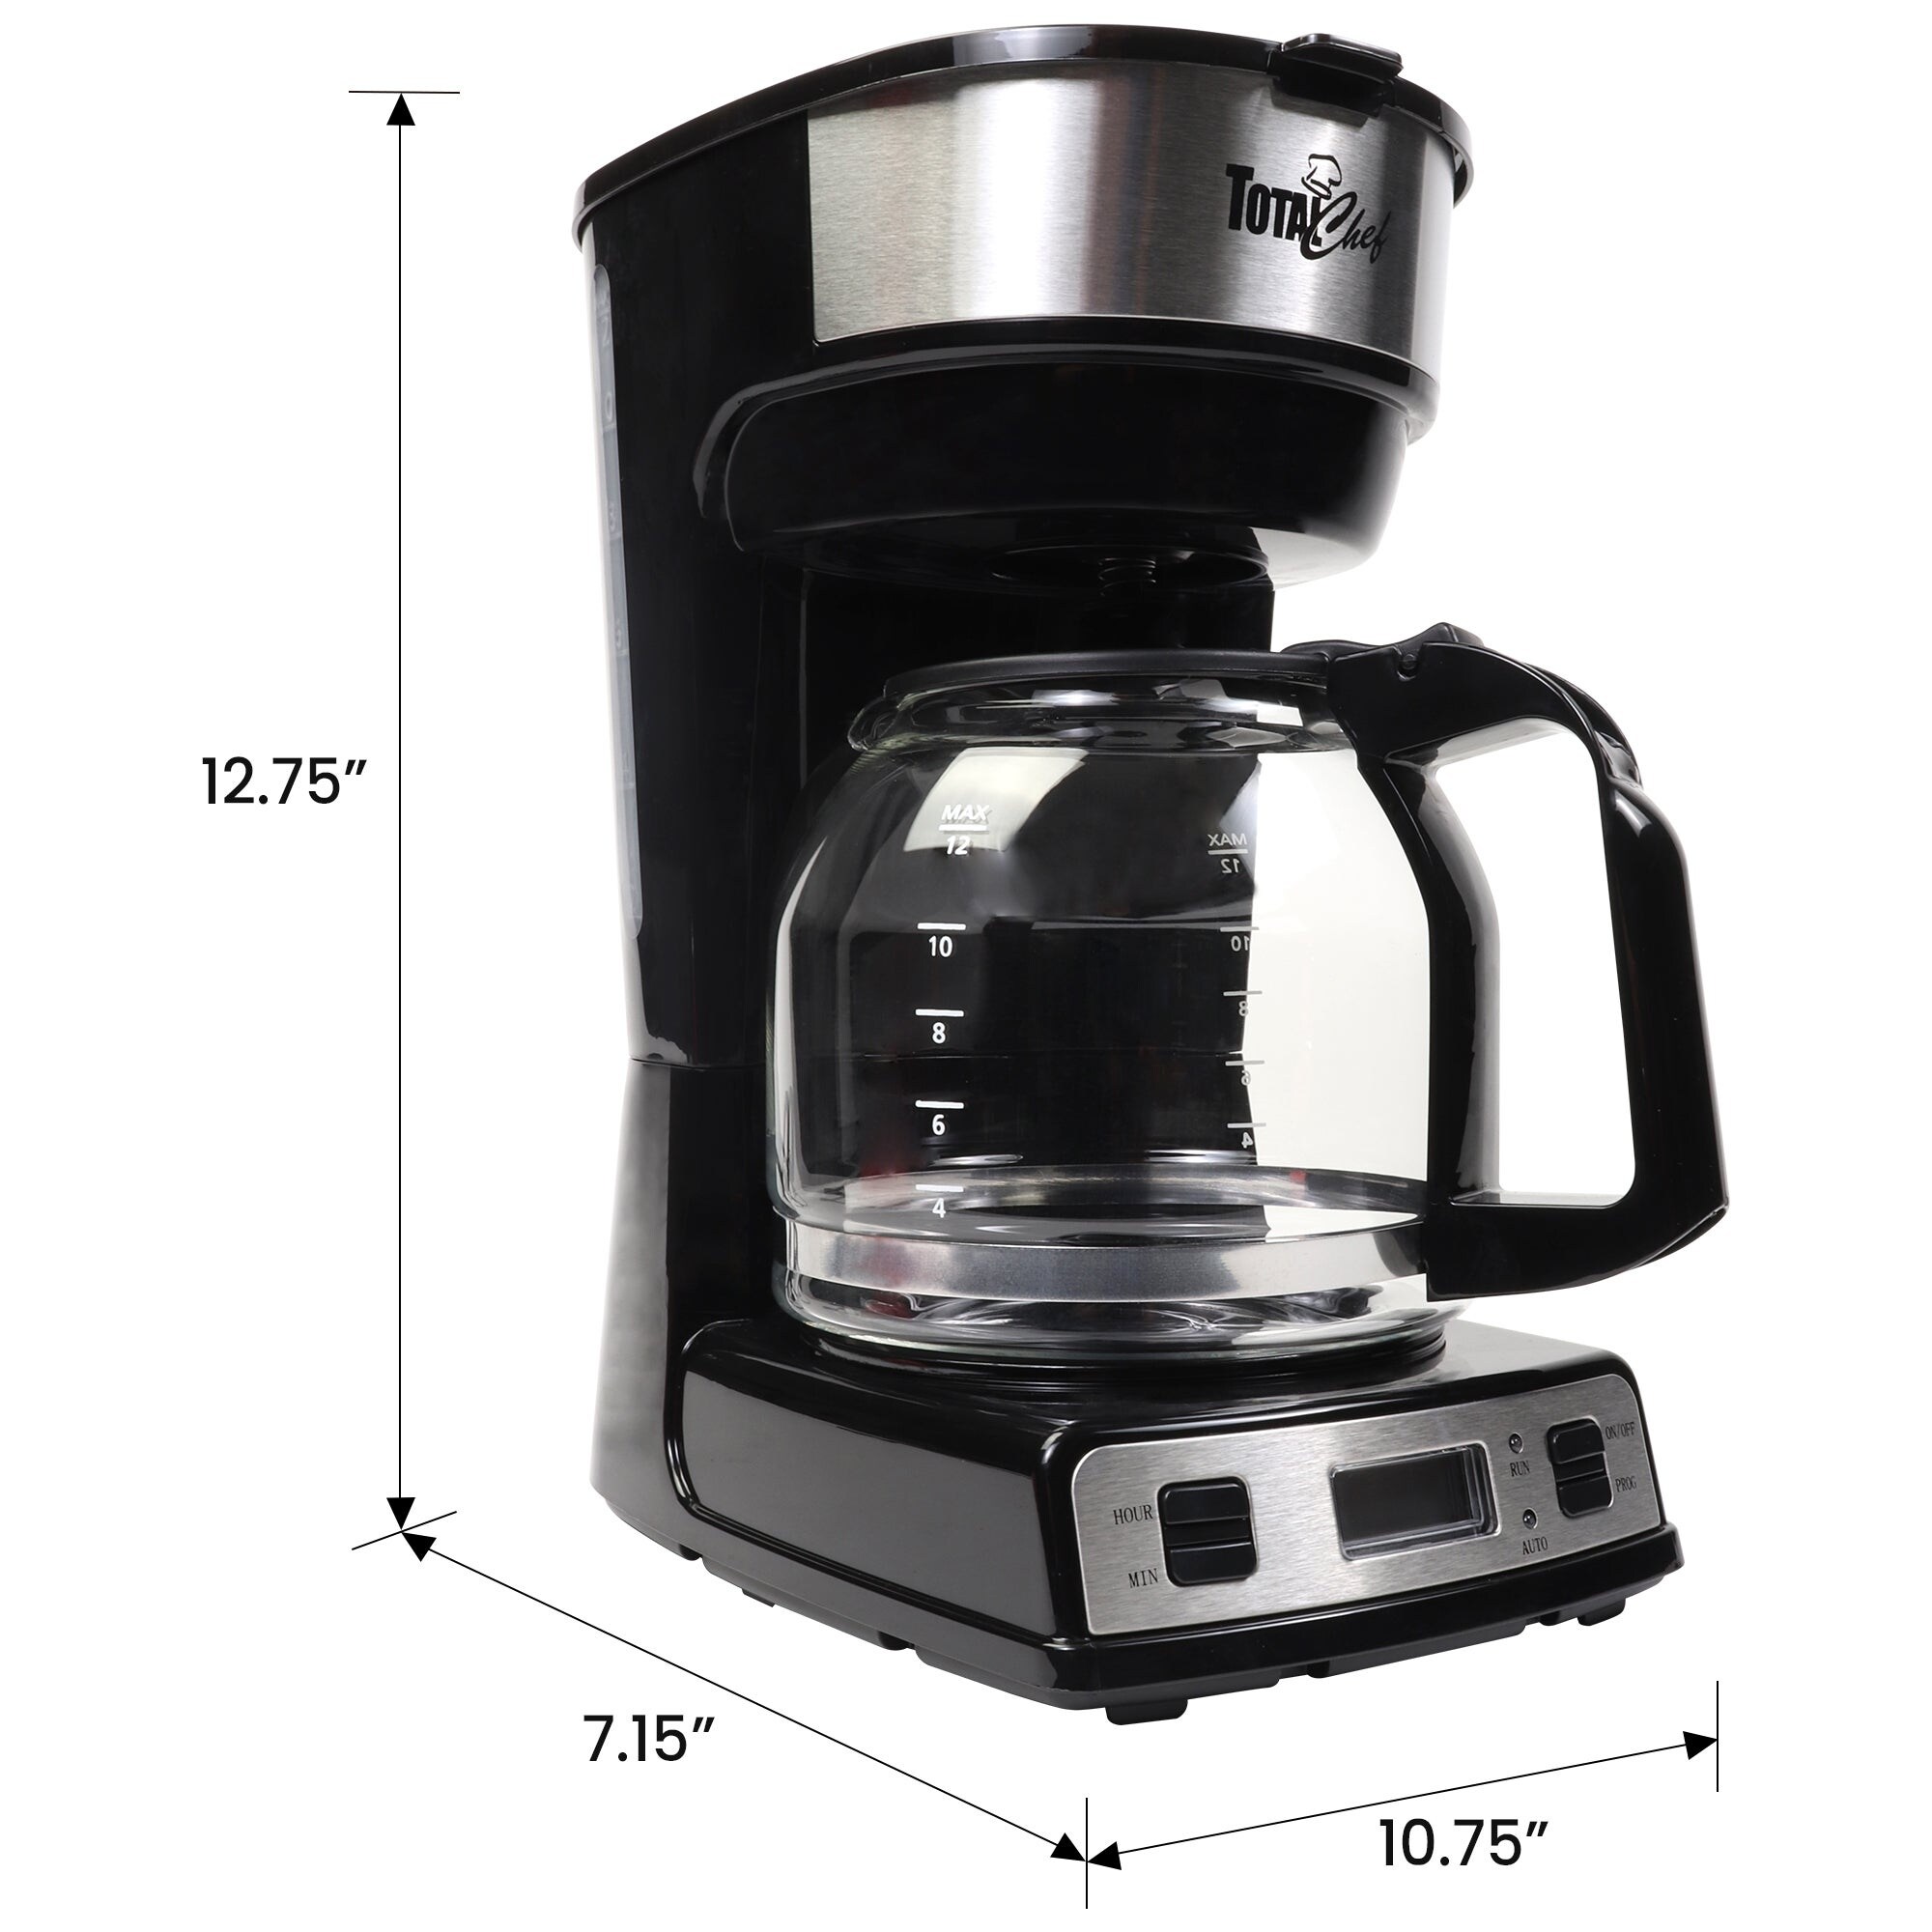 Mr. Coffee 12-Cup Programable Coffee Maker Black/Stainless Steel